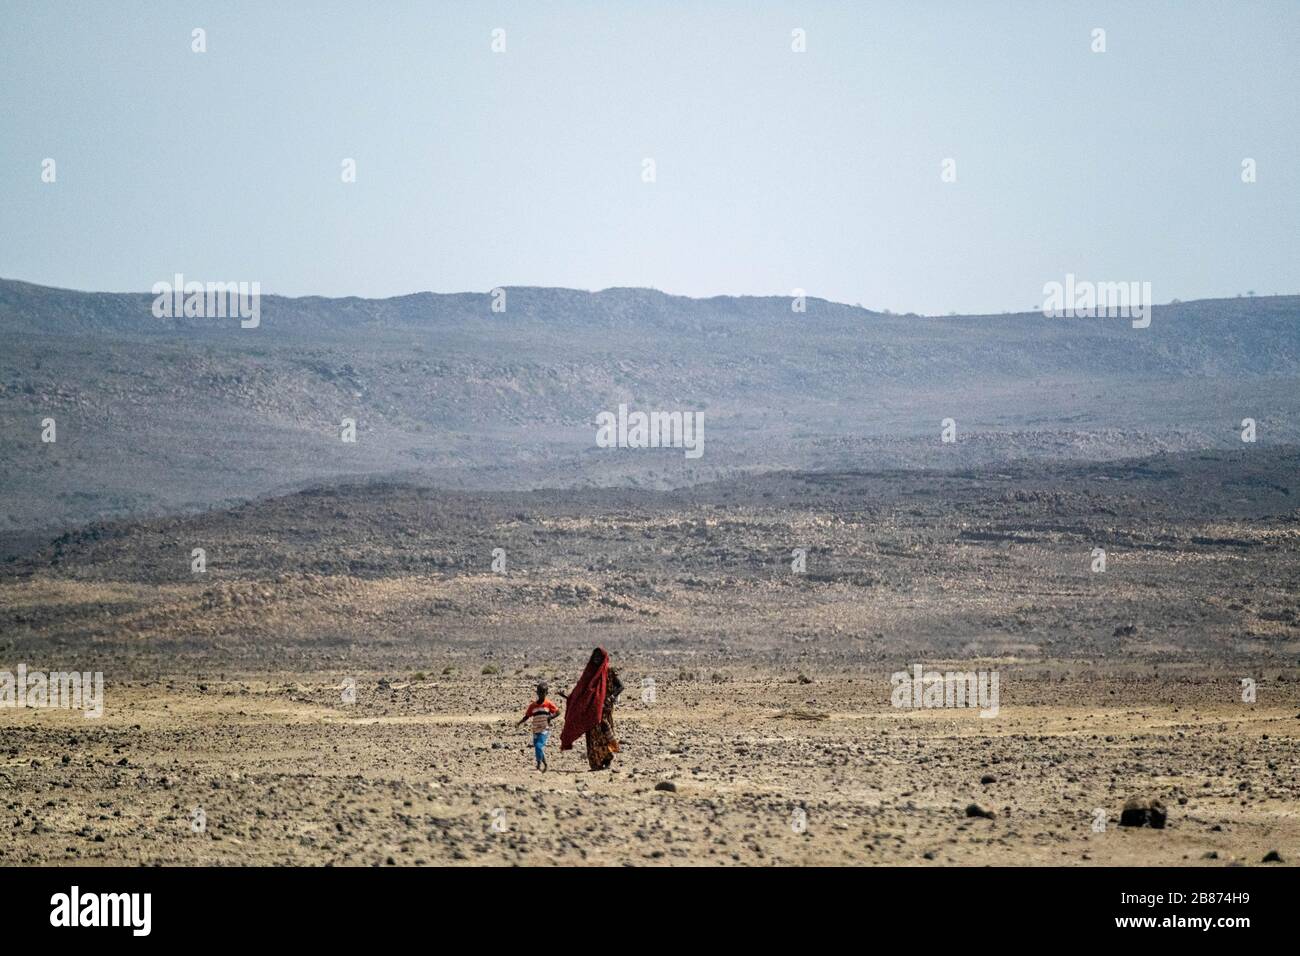 Africa, Djibouti, Lake Abbe. Landscape view of lake Abbe A mother and child are walking next in lake Abbe's desert Stock Photo